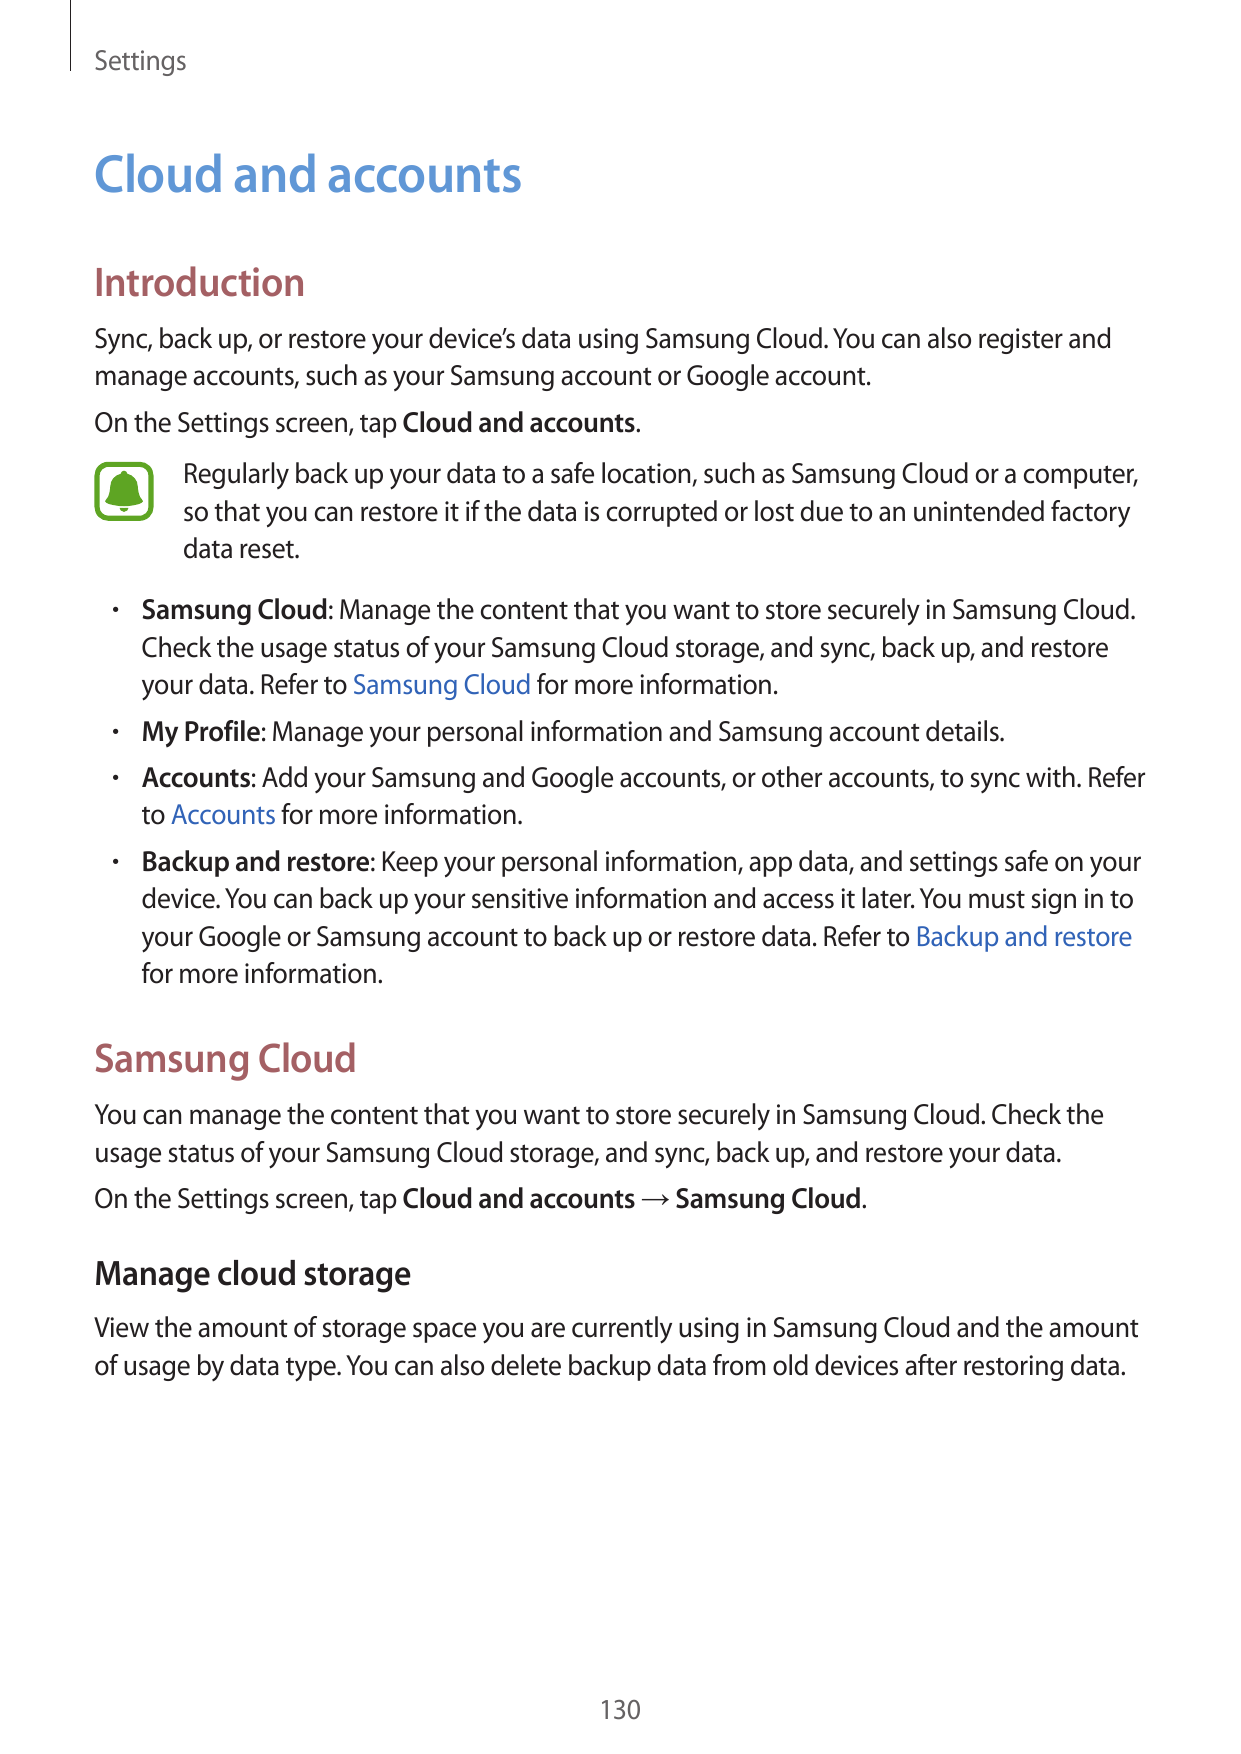 SettingsCloud and accountsIntroductionSync, back up, or restore your device’s data using Samsung Cloud. You can also register an